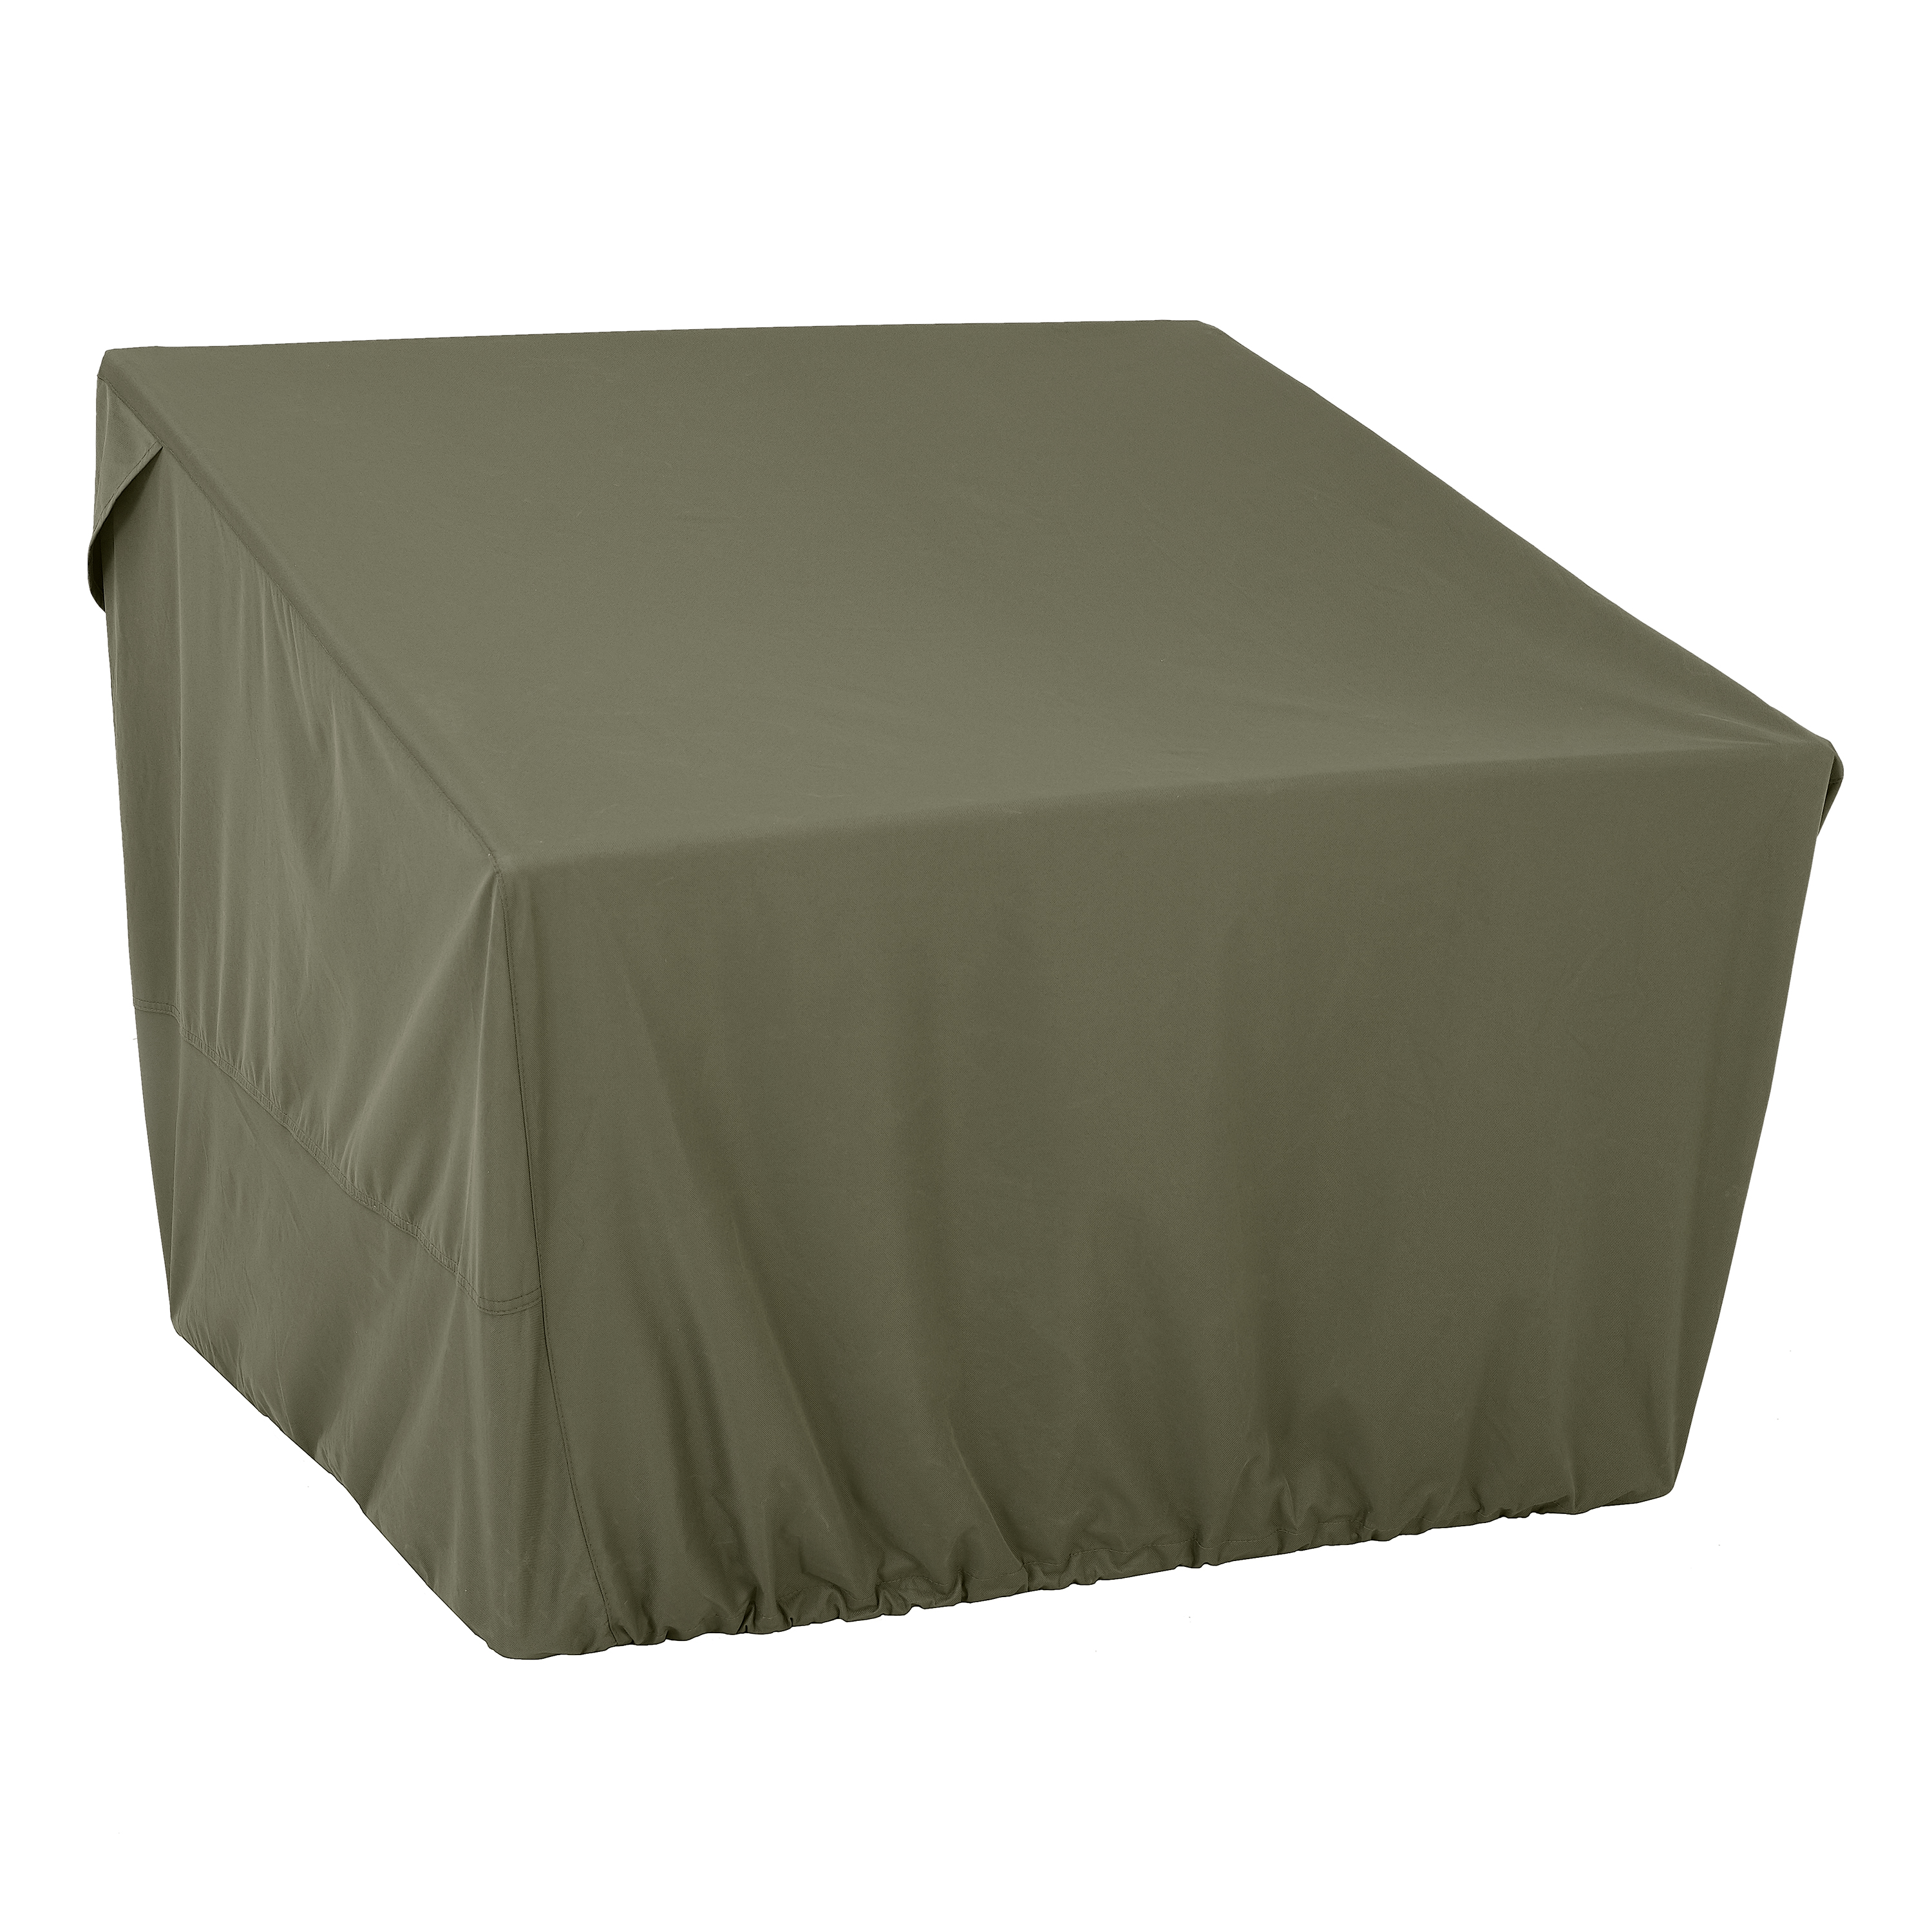 Better Homes & Gardens Hillberge Patio Lounge Chair Cover, 40 x 40 x 36 inch, Olive Gray - image 1 of 2